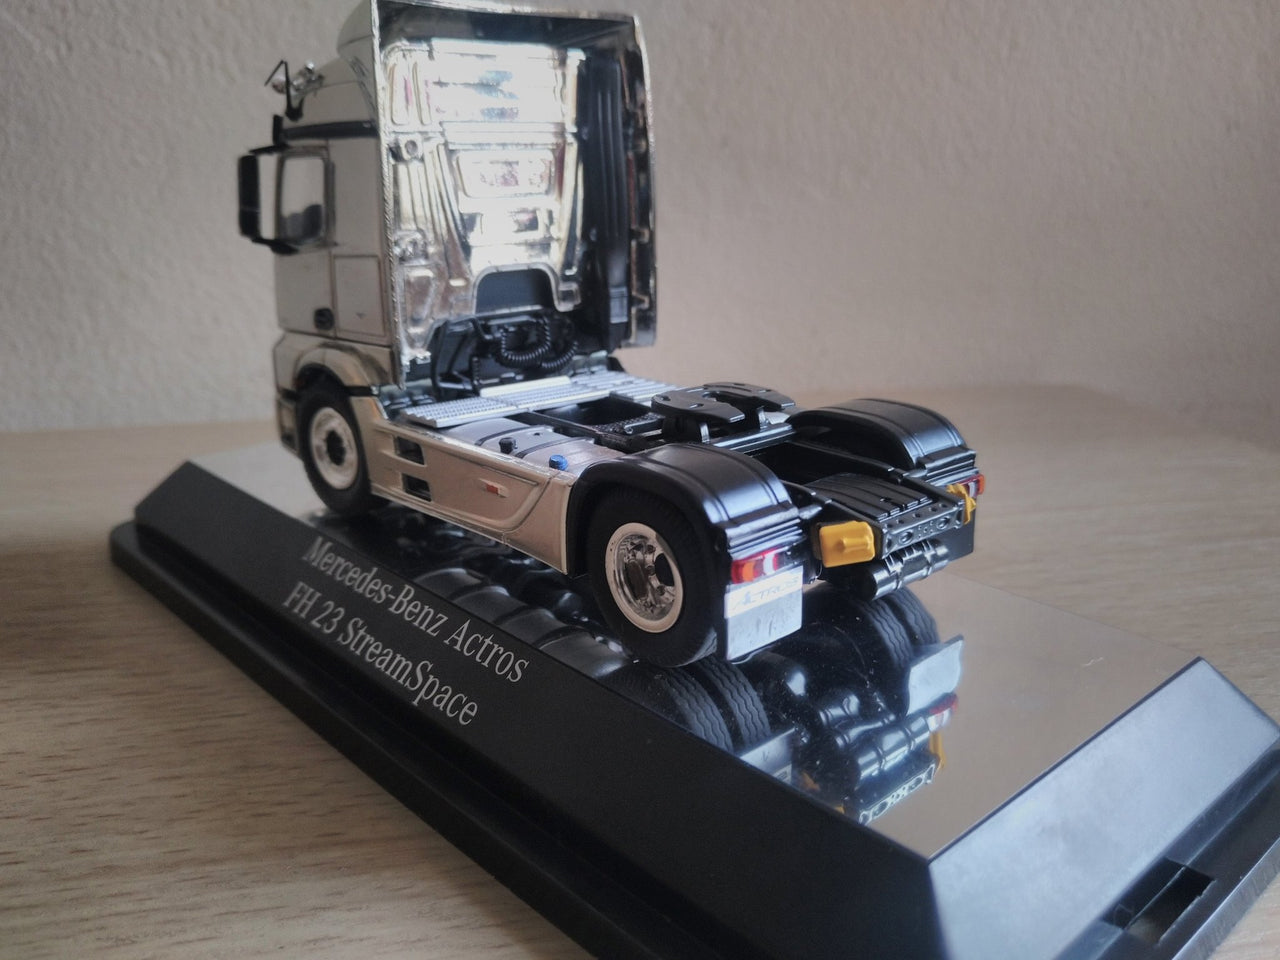 846-01 Tracto Mercedes-Benz FH23 StreamSpace 4x2 Scale 1:50 (Discontinued Model)